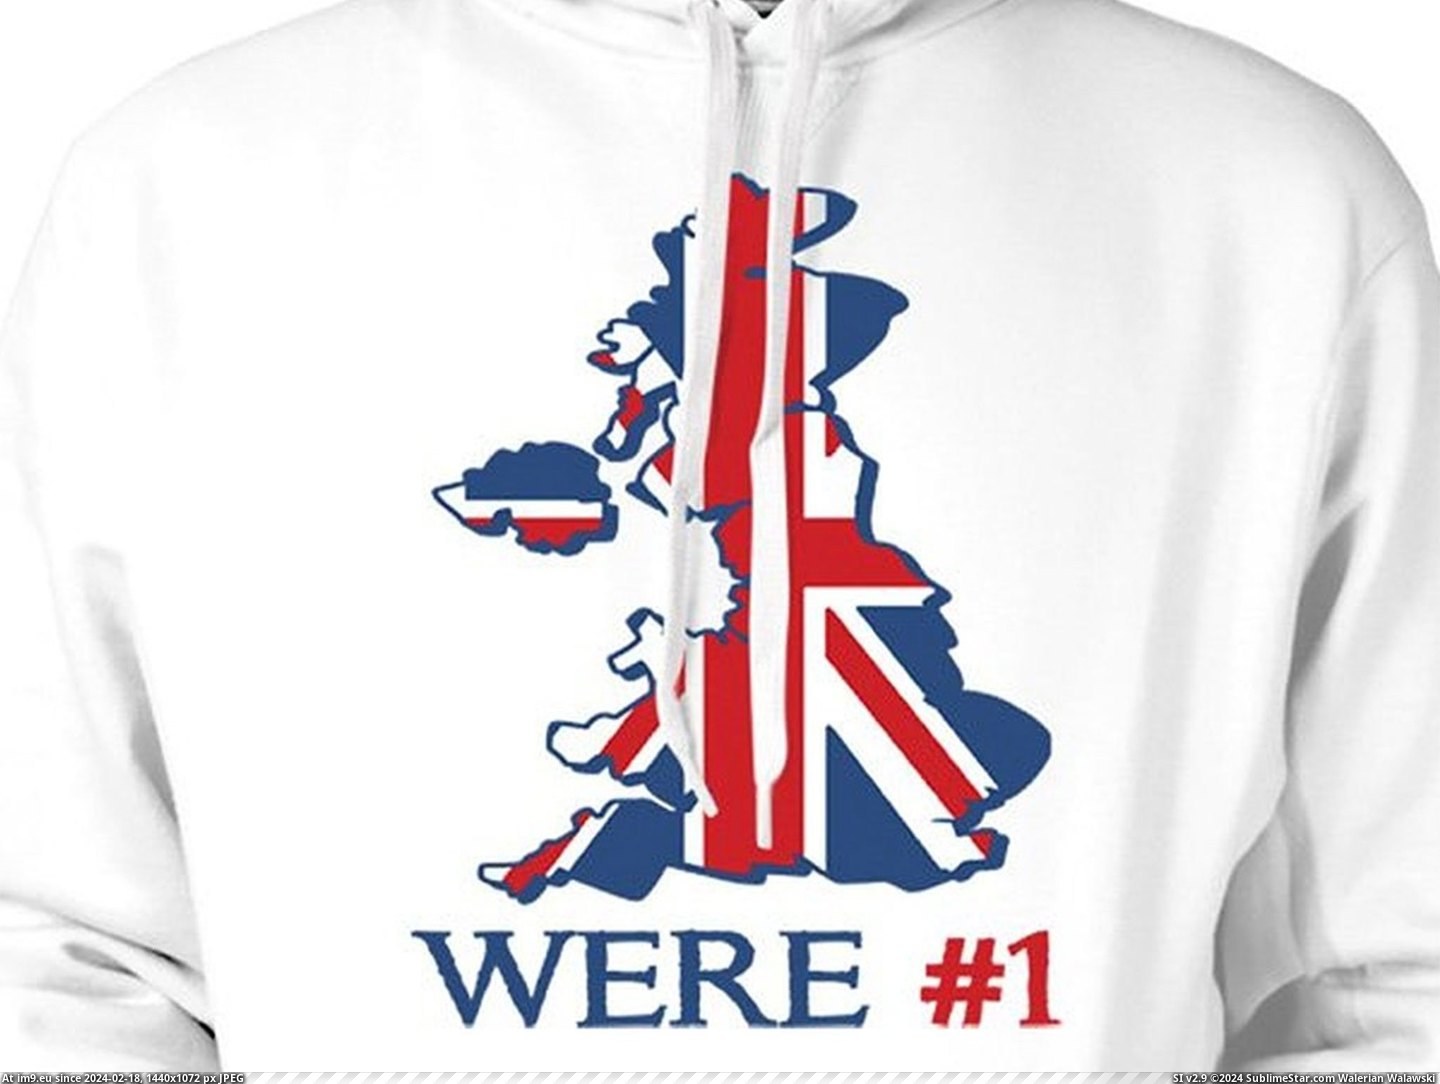 #Funny #Years #British #Hoodie #Neatly #Apostrophe #Unitedkingdom #History #Sums #Lack [Funny] A lack of an apostrophe on a British hoodie neatly sums up the last 300 years of British history. (UnitedKingdom) Pic. (Изображение из альбом My r/FUNNY favs))